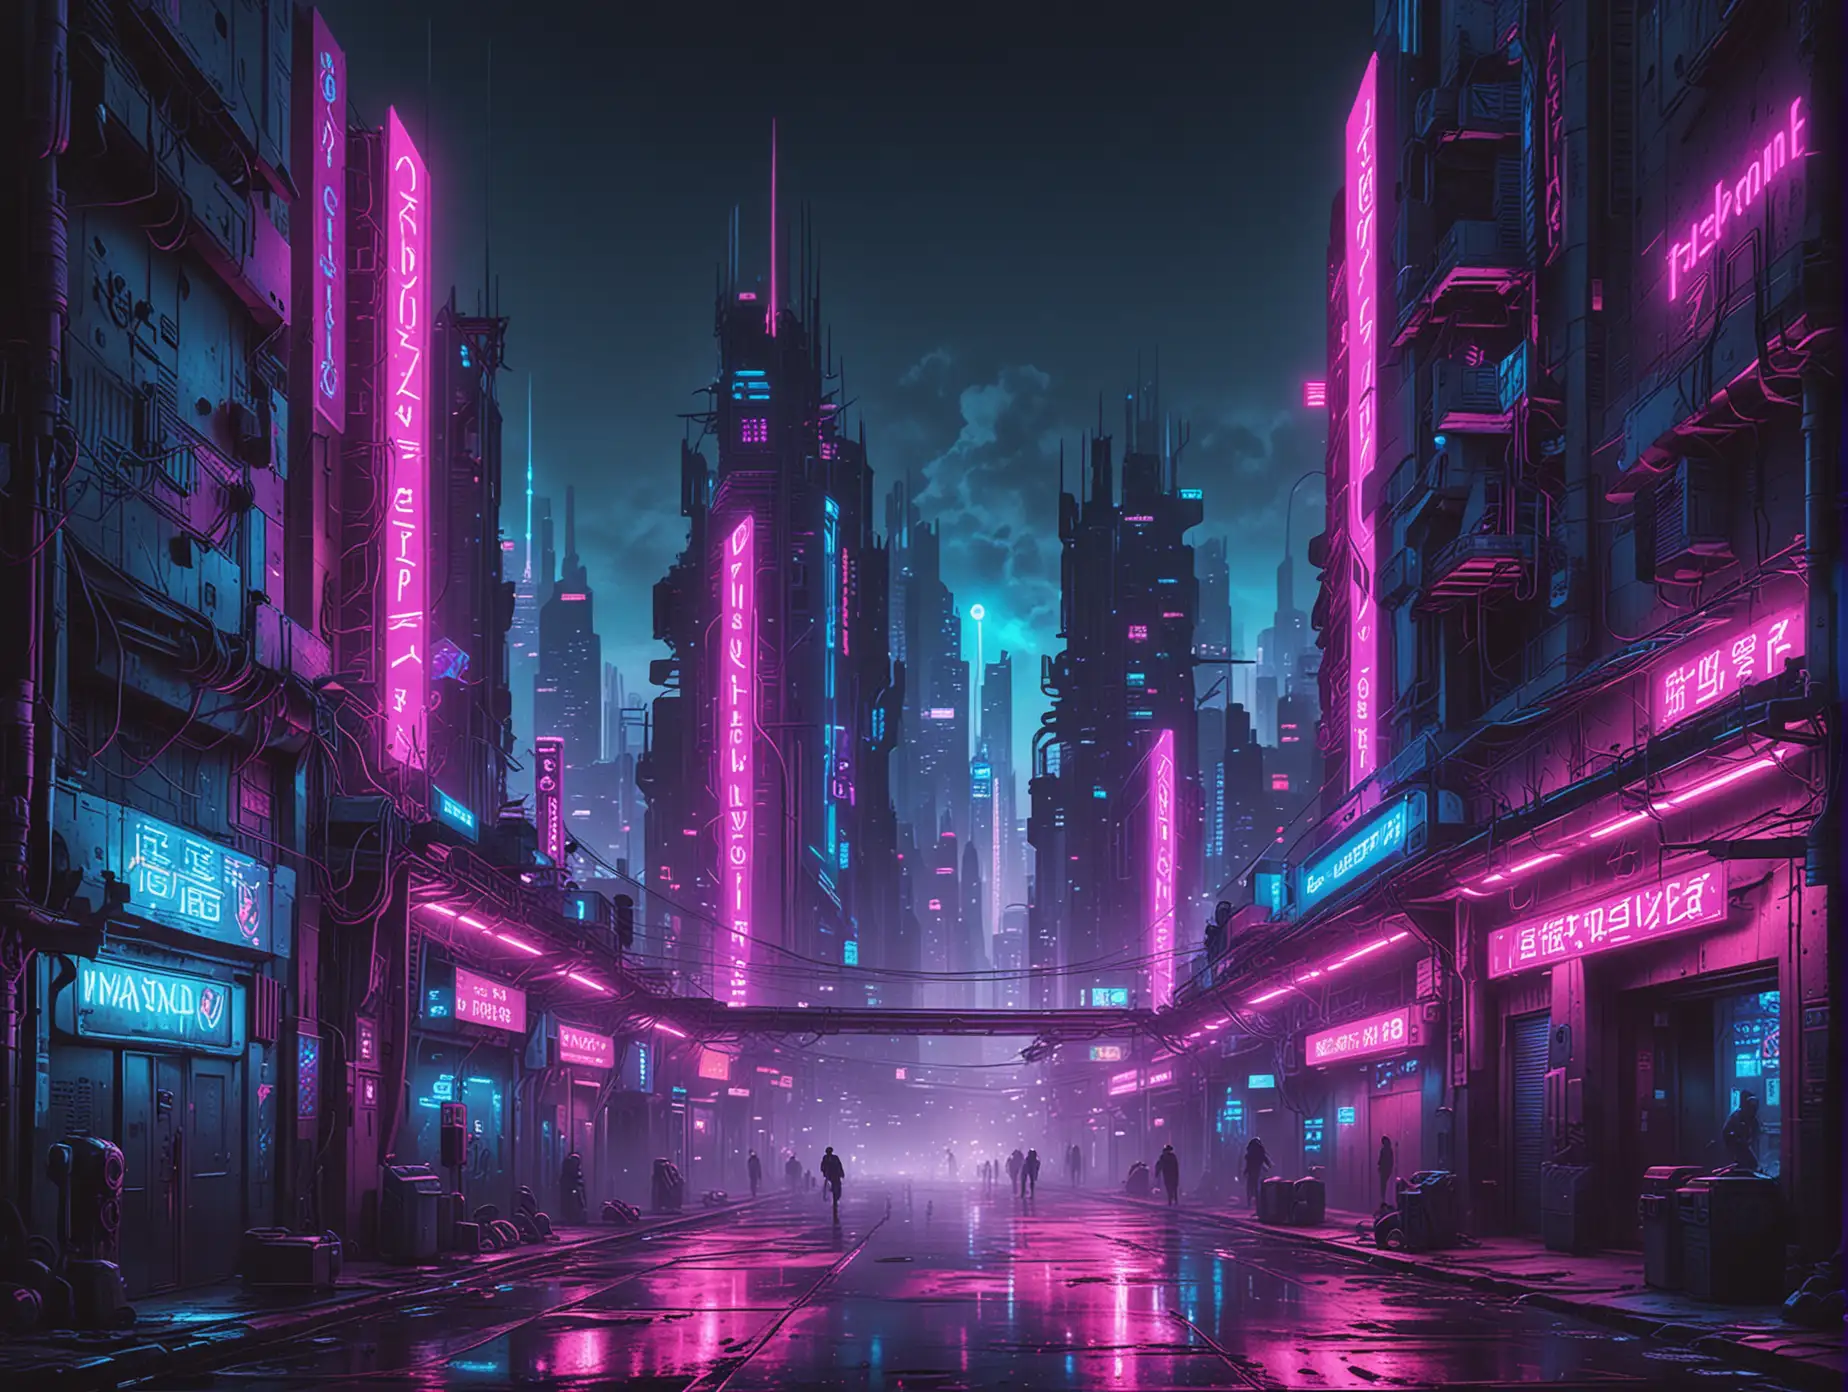 Give me an image of a distopian futuristic cyberpunk city at night with a neon magenta and electric blue colour scheme.